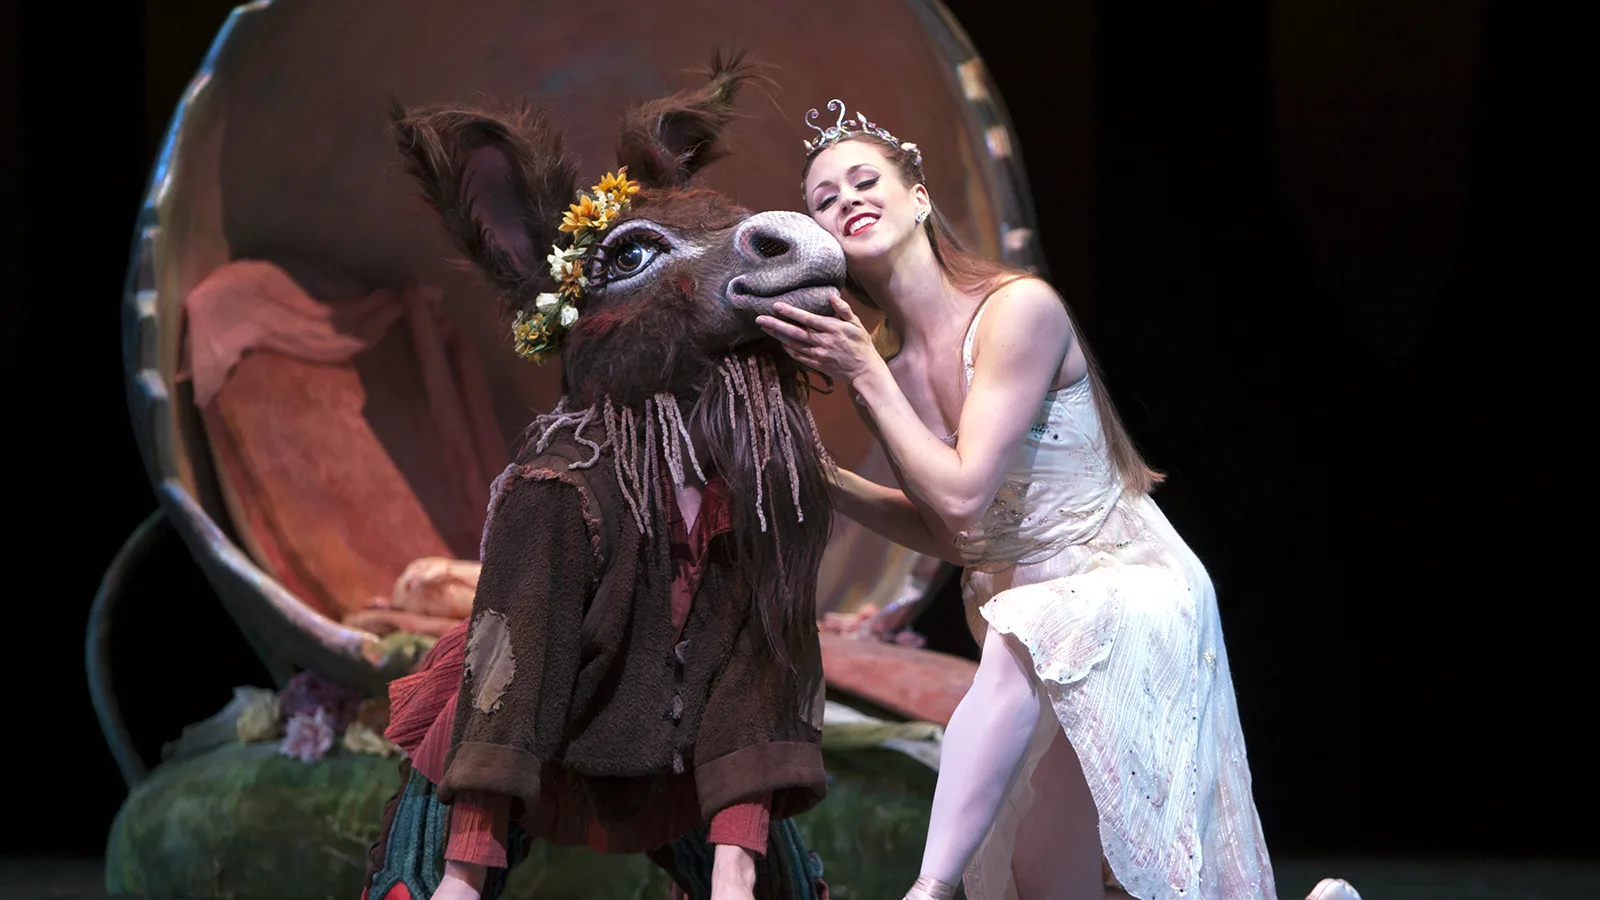 The Fairy Queen, Titania embraces a ballet dancer wearing a donkey head